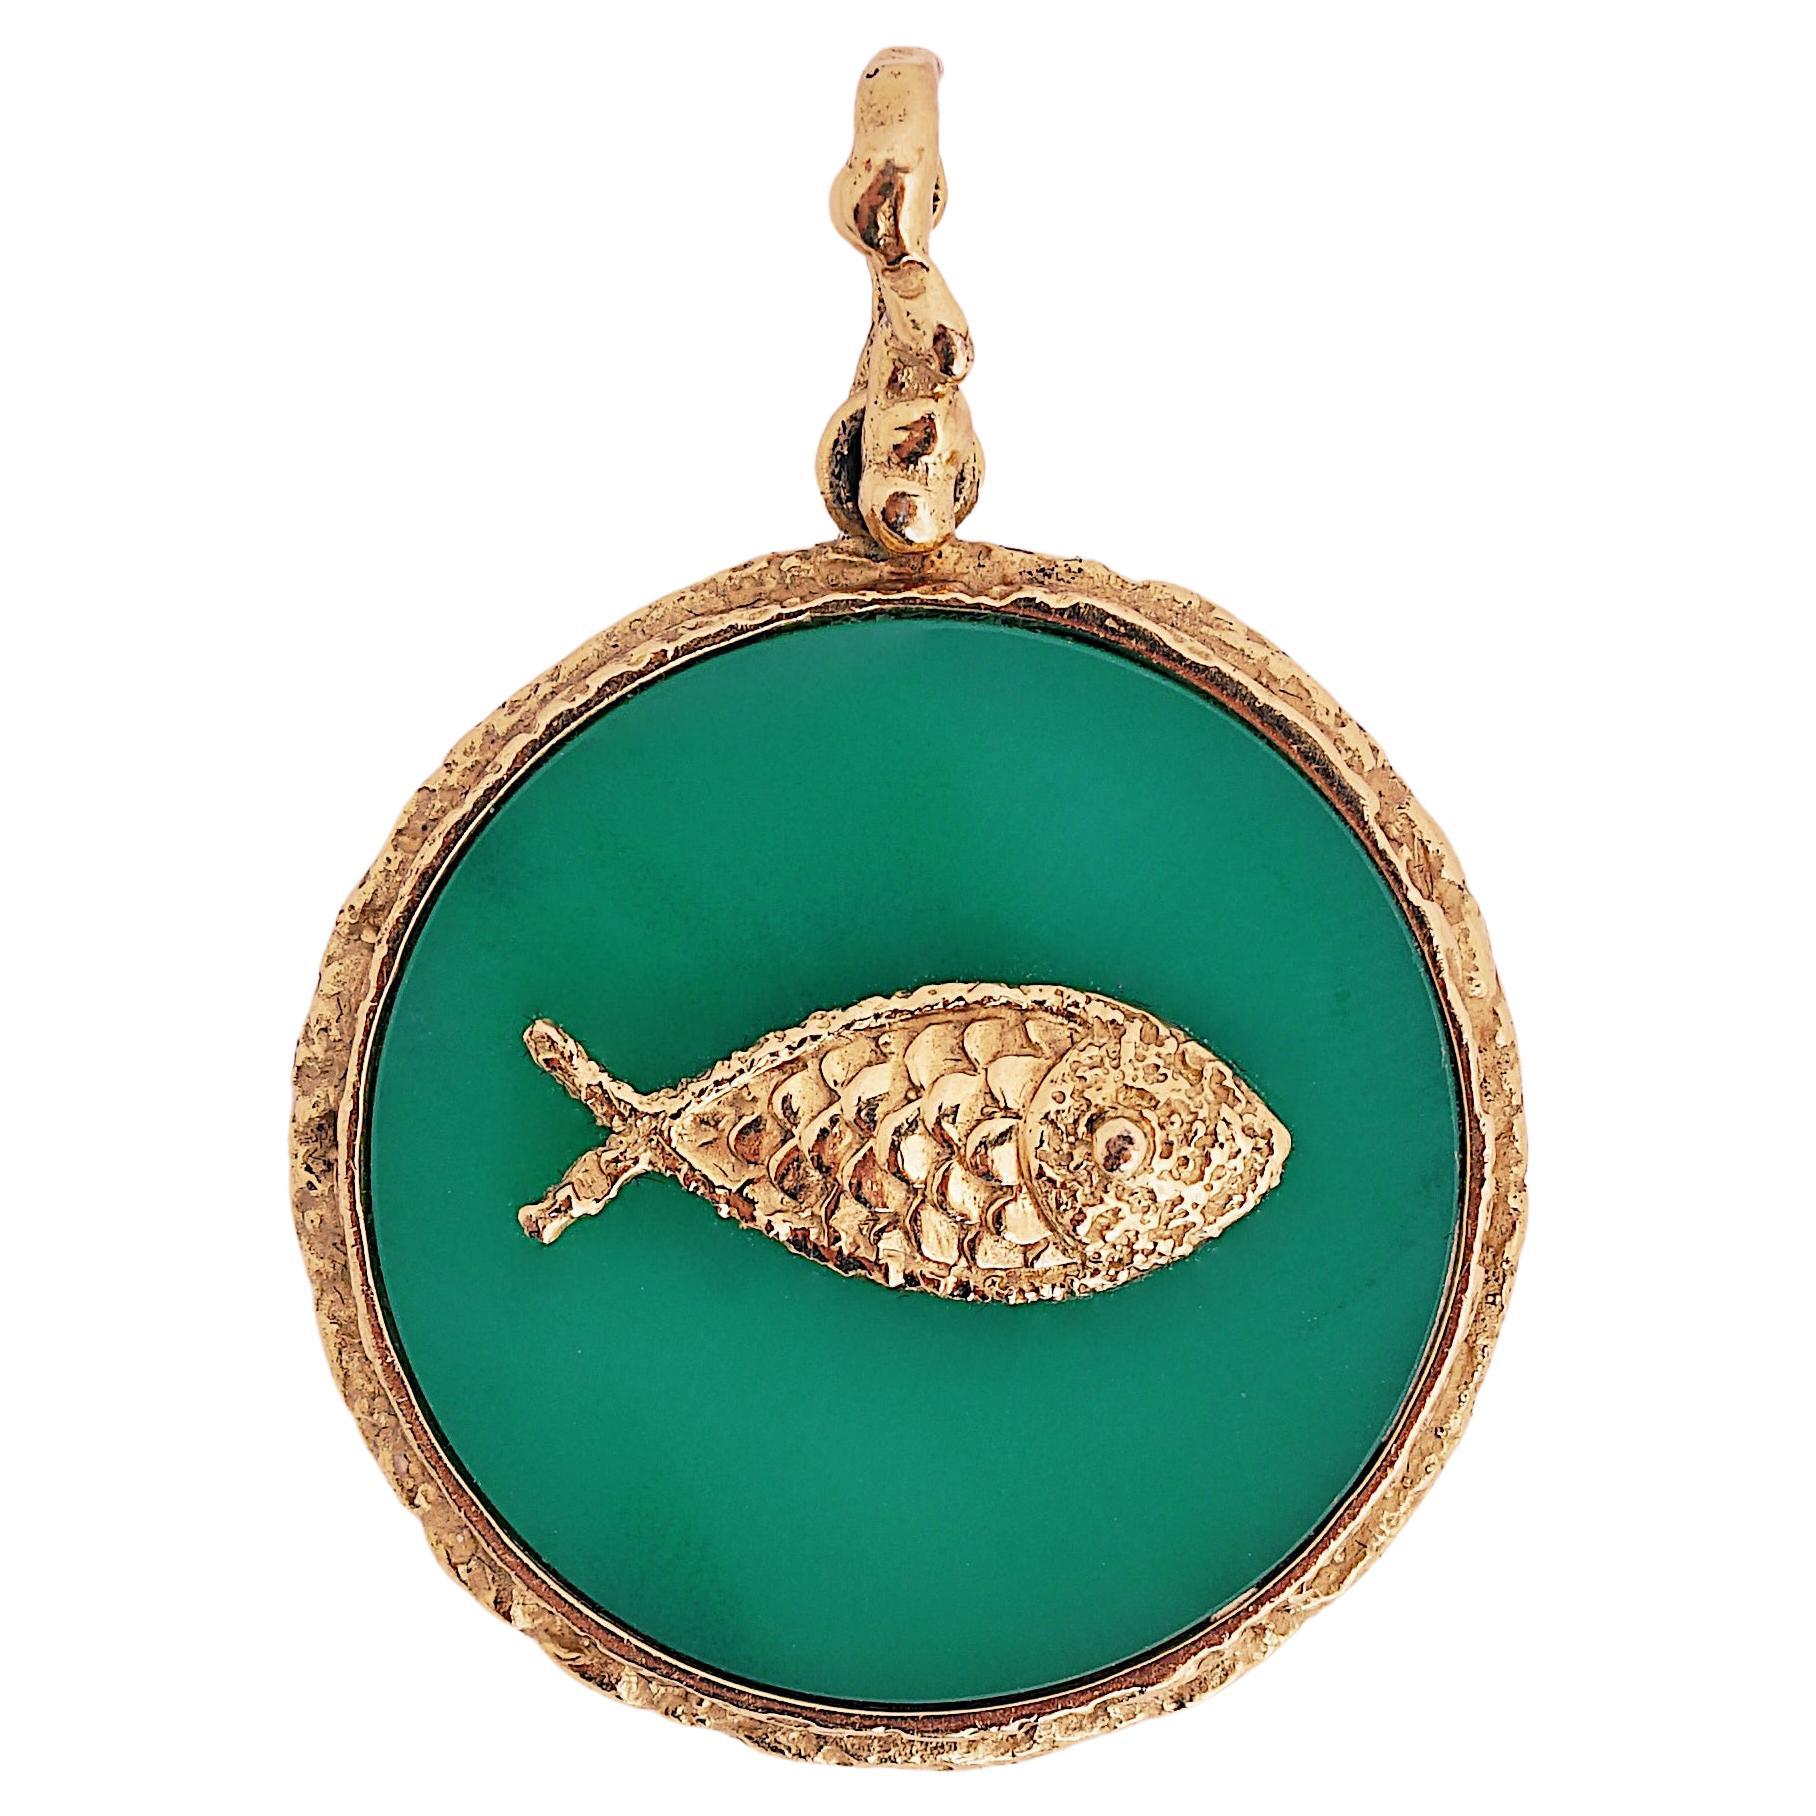 1963, Georges Braque "Idothee" 18K Gold and Chrysoprase Pendant